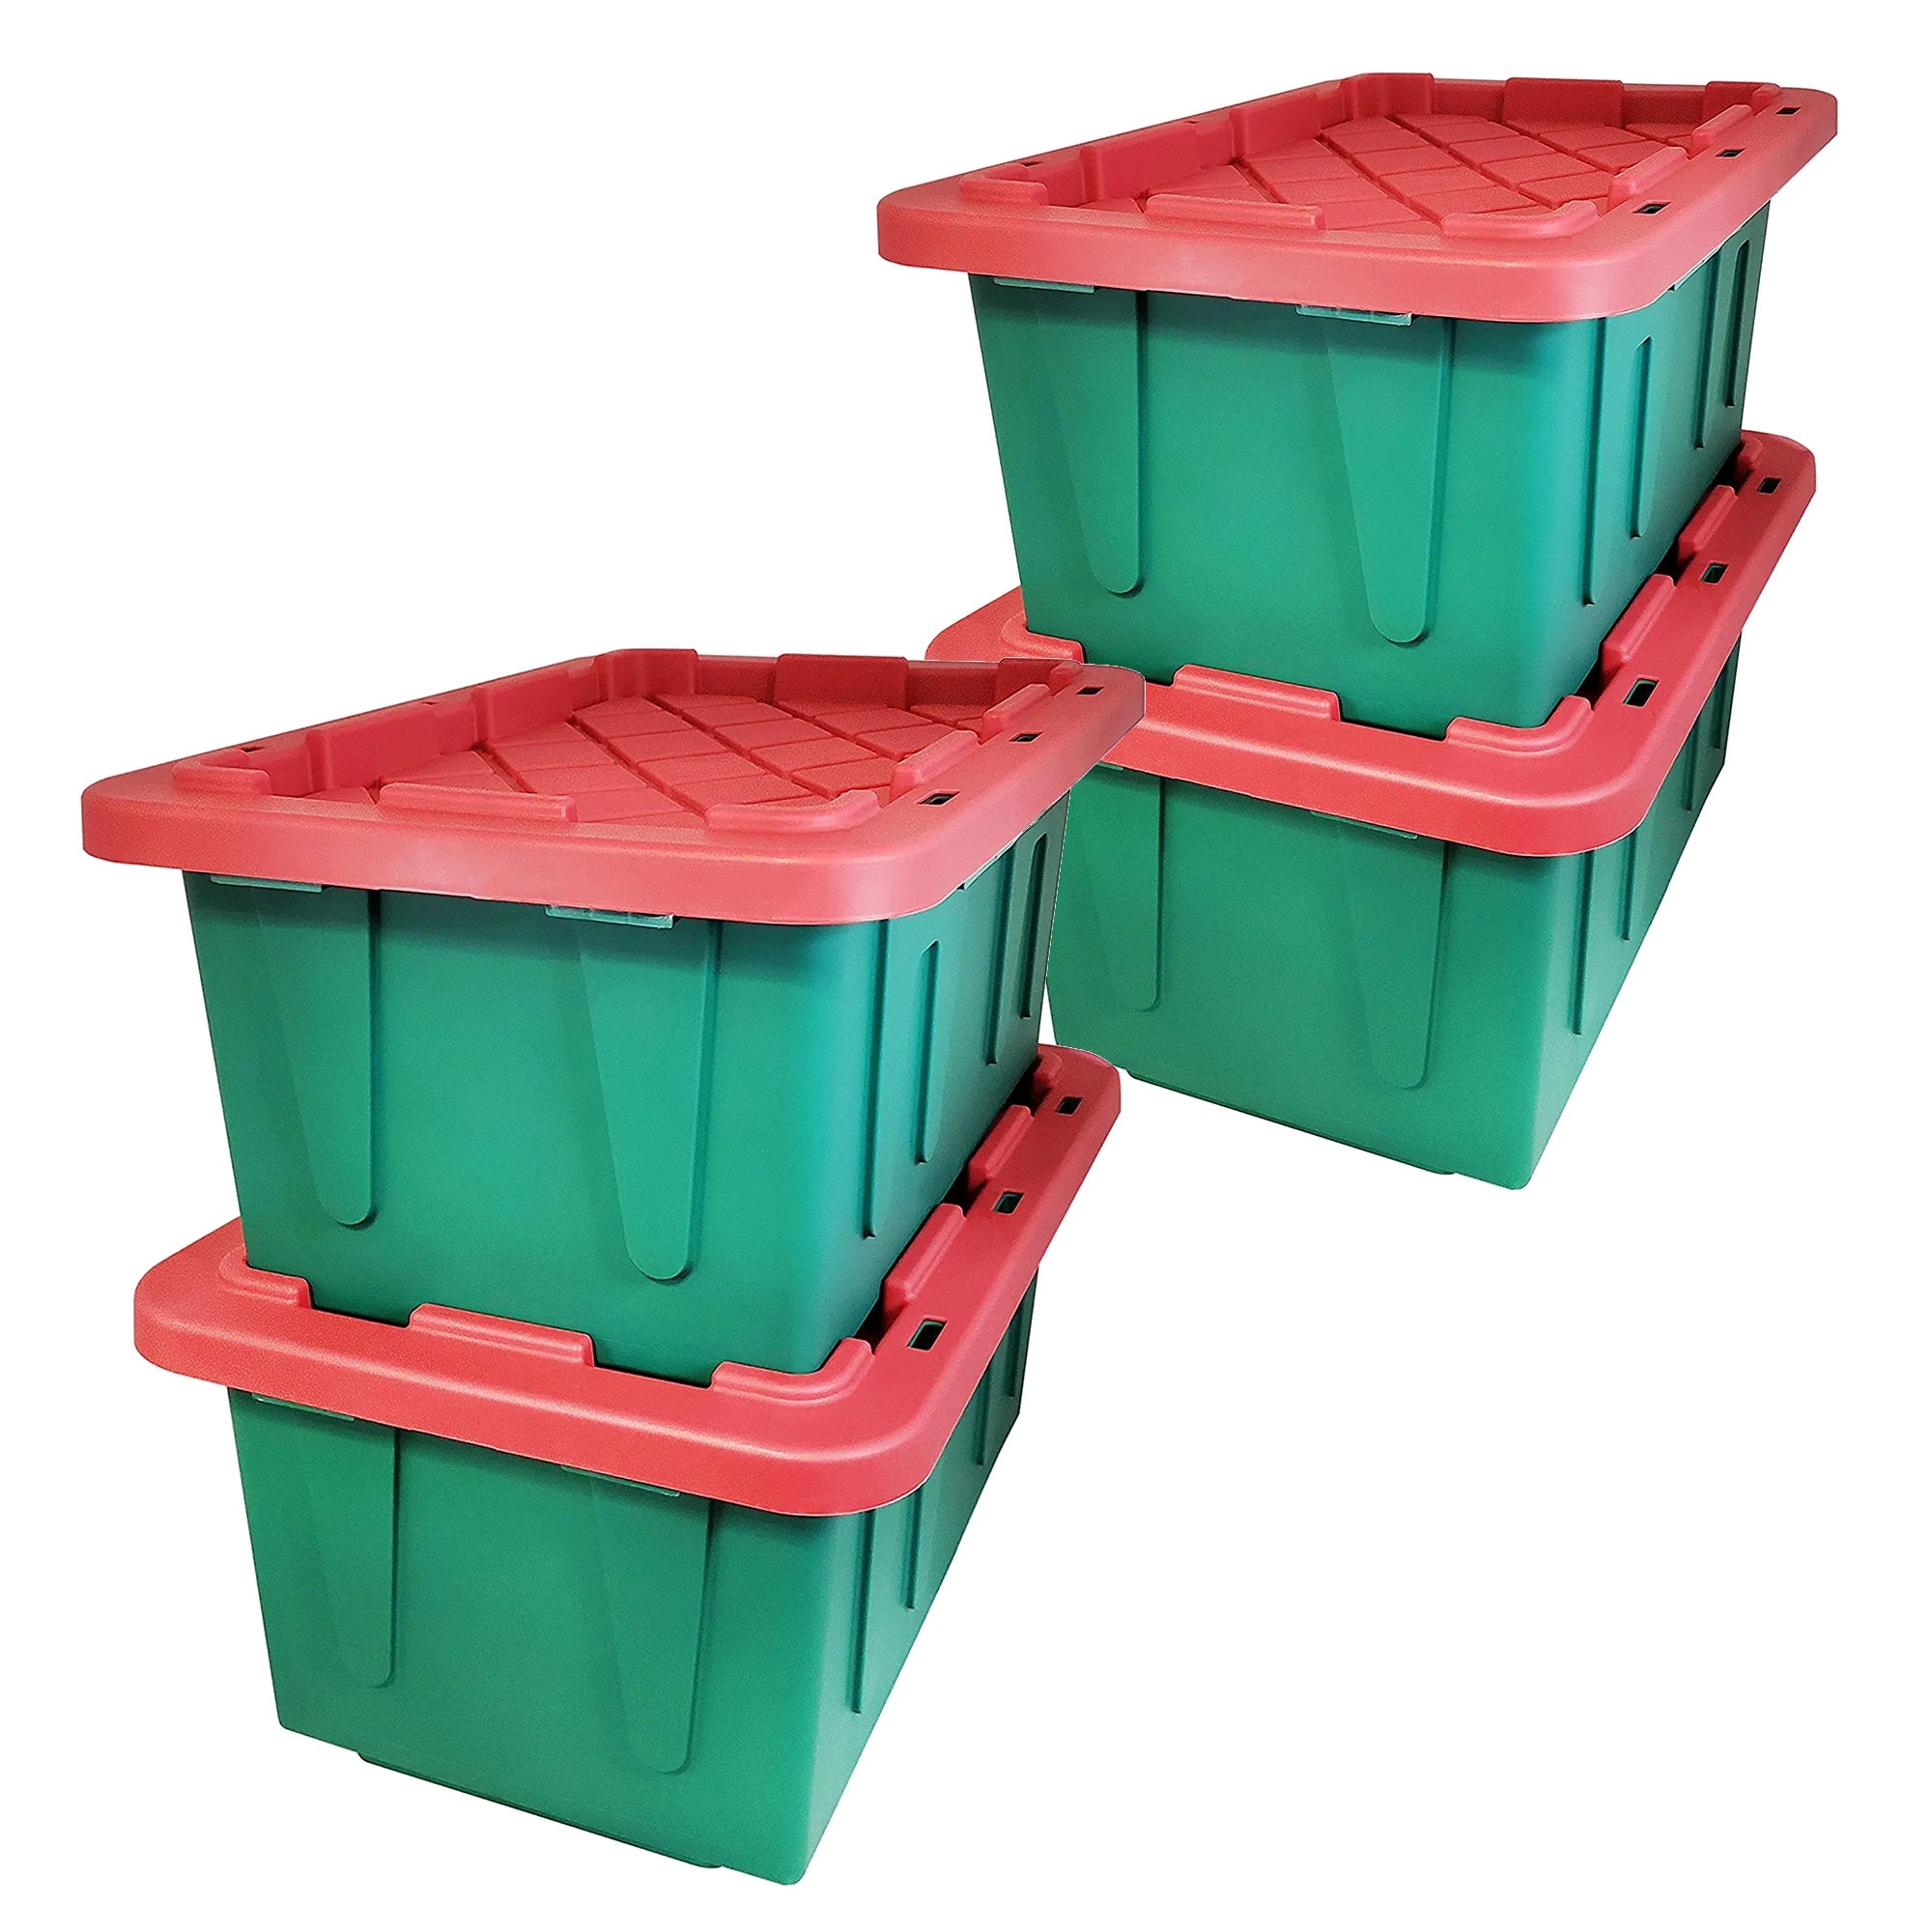 https://ak1.ostkcdn.com/images/products/is/images/direct/4be1953fa4b3fd869ae15de04d329cf3bf1b2e94/HOMZ-Durabilt-15-Gallon-Heavy-Duty-Holiday-Storage-Tote%2C-Green-Red-%284-Pack%29.jpg